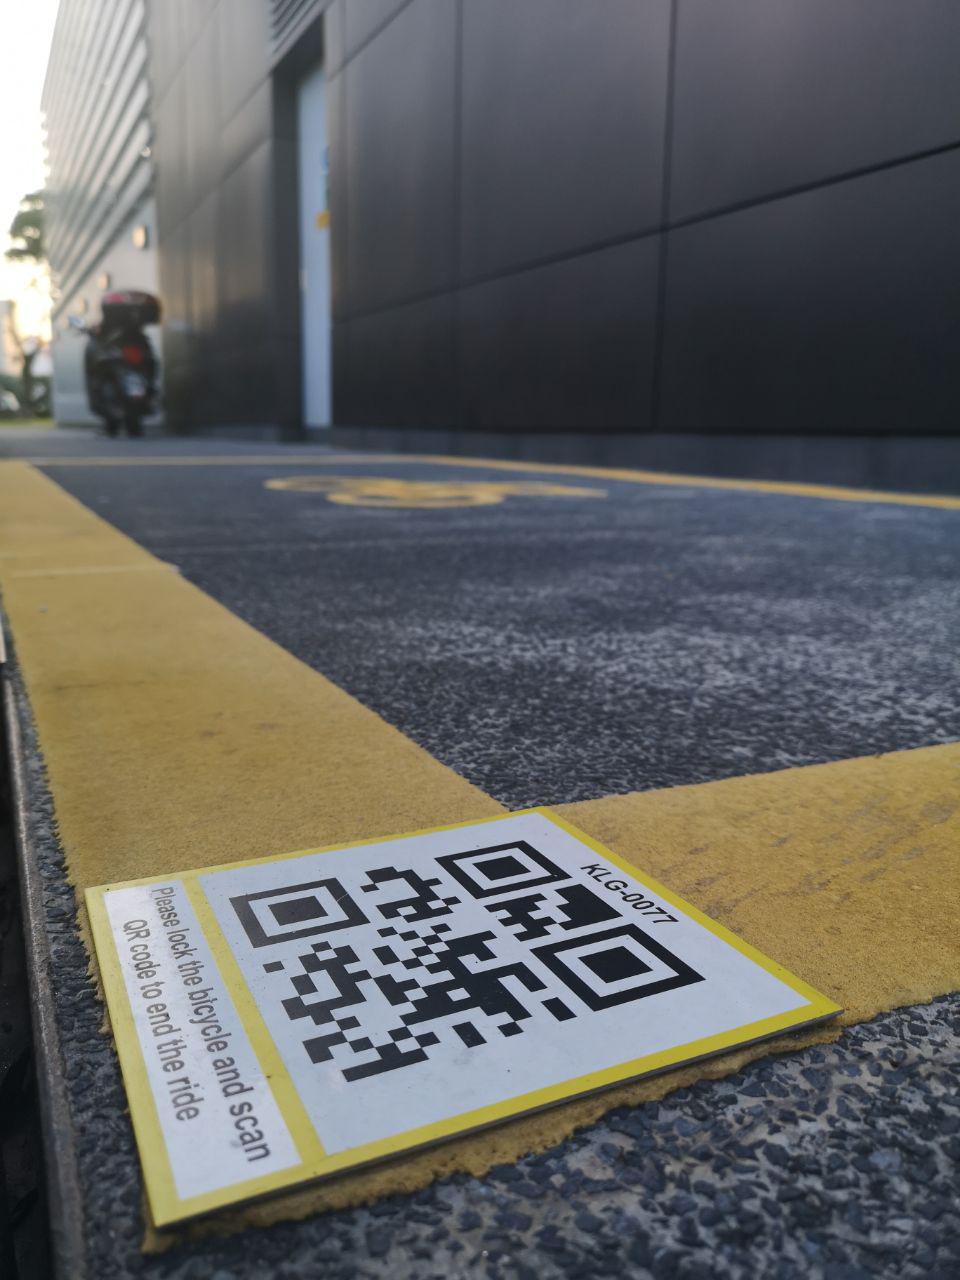 Mandatory QR code parking for shared bicycles starts on Jan. 14. Here's how  it works. - Mothership.SG - News from Singapore, Asia and around the world